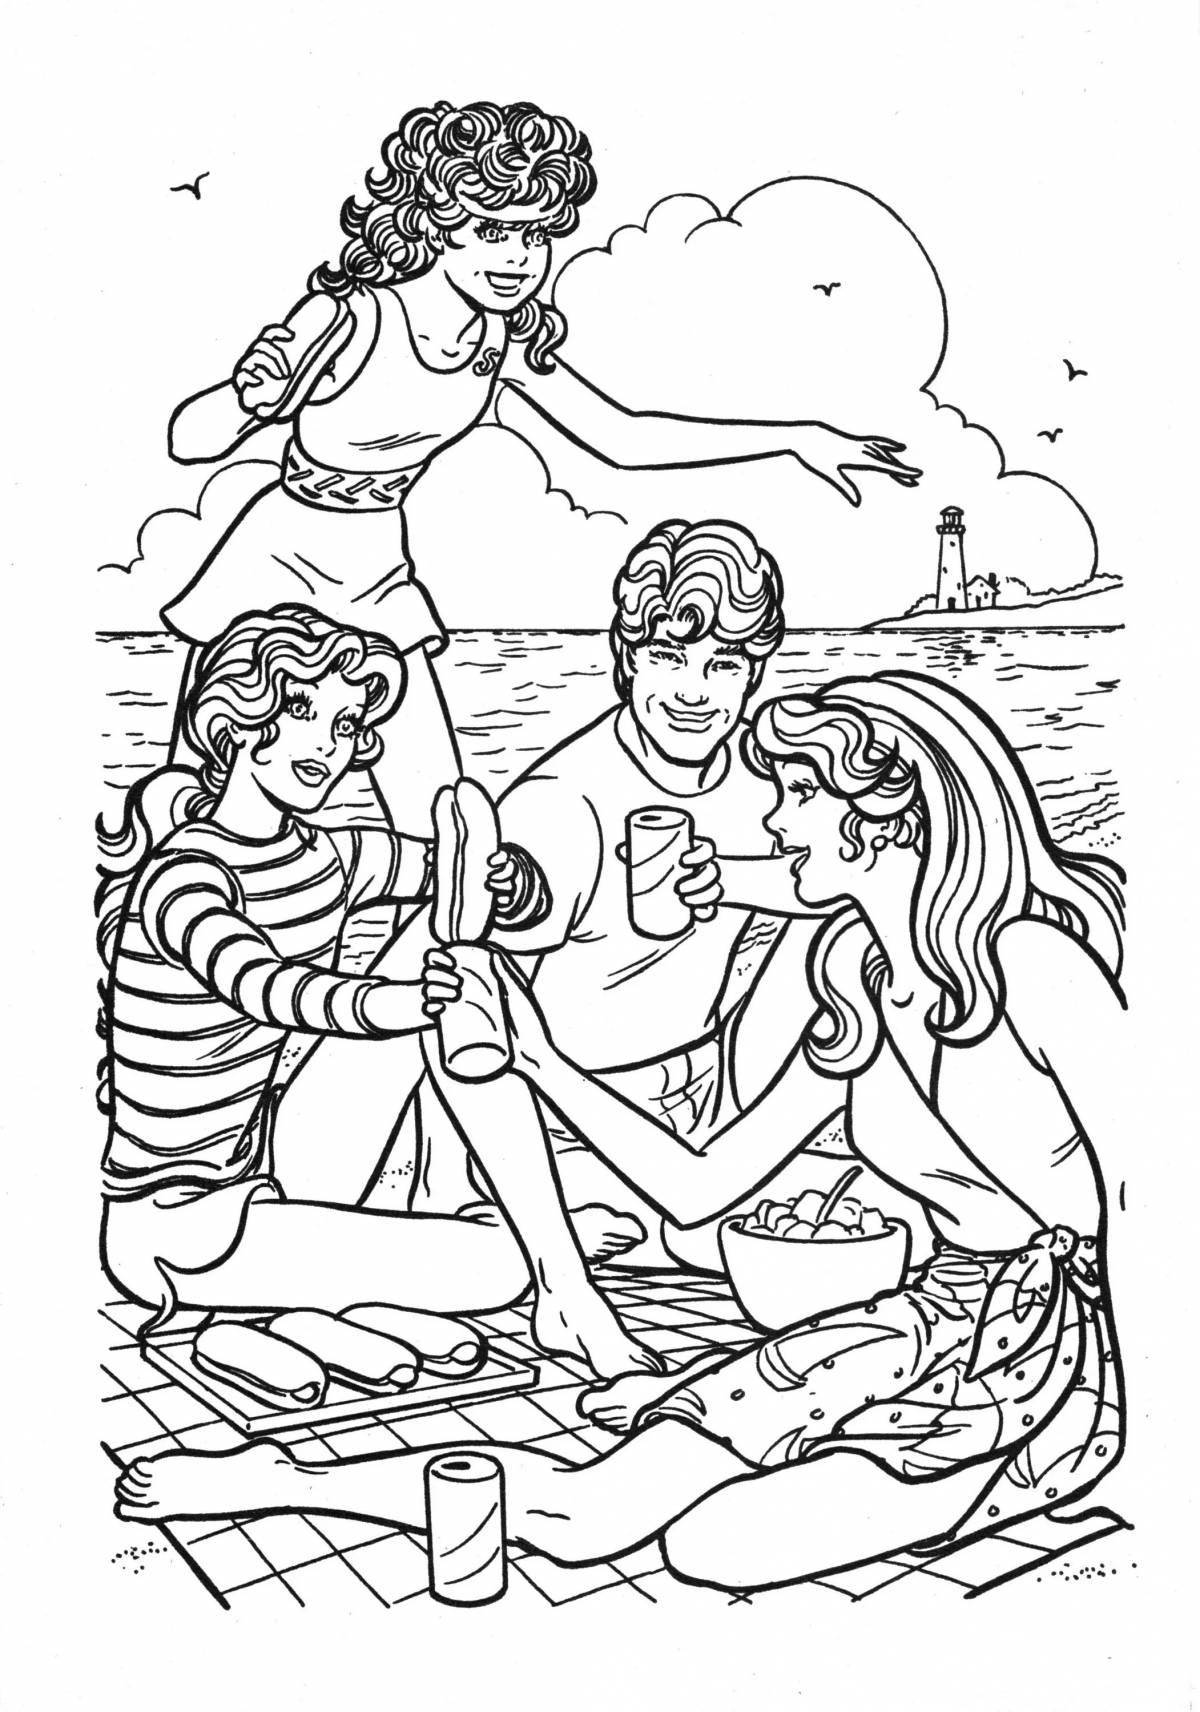 Coloring book glowing family in the sea